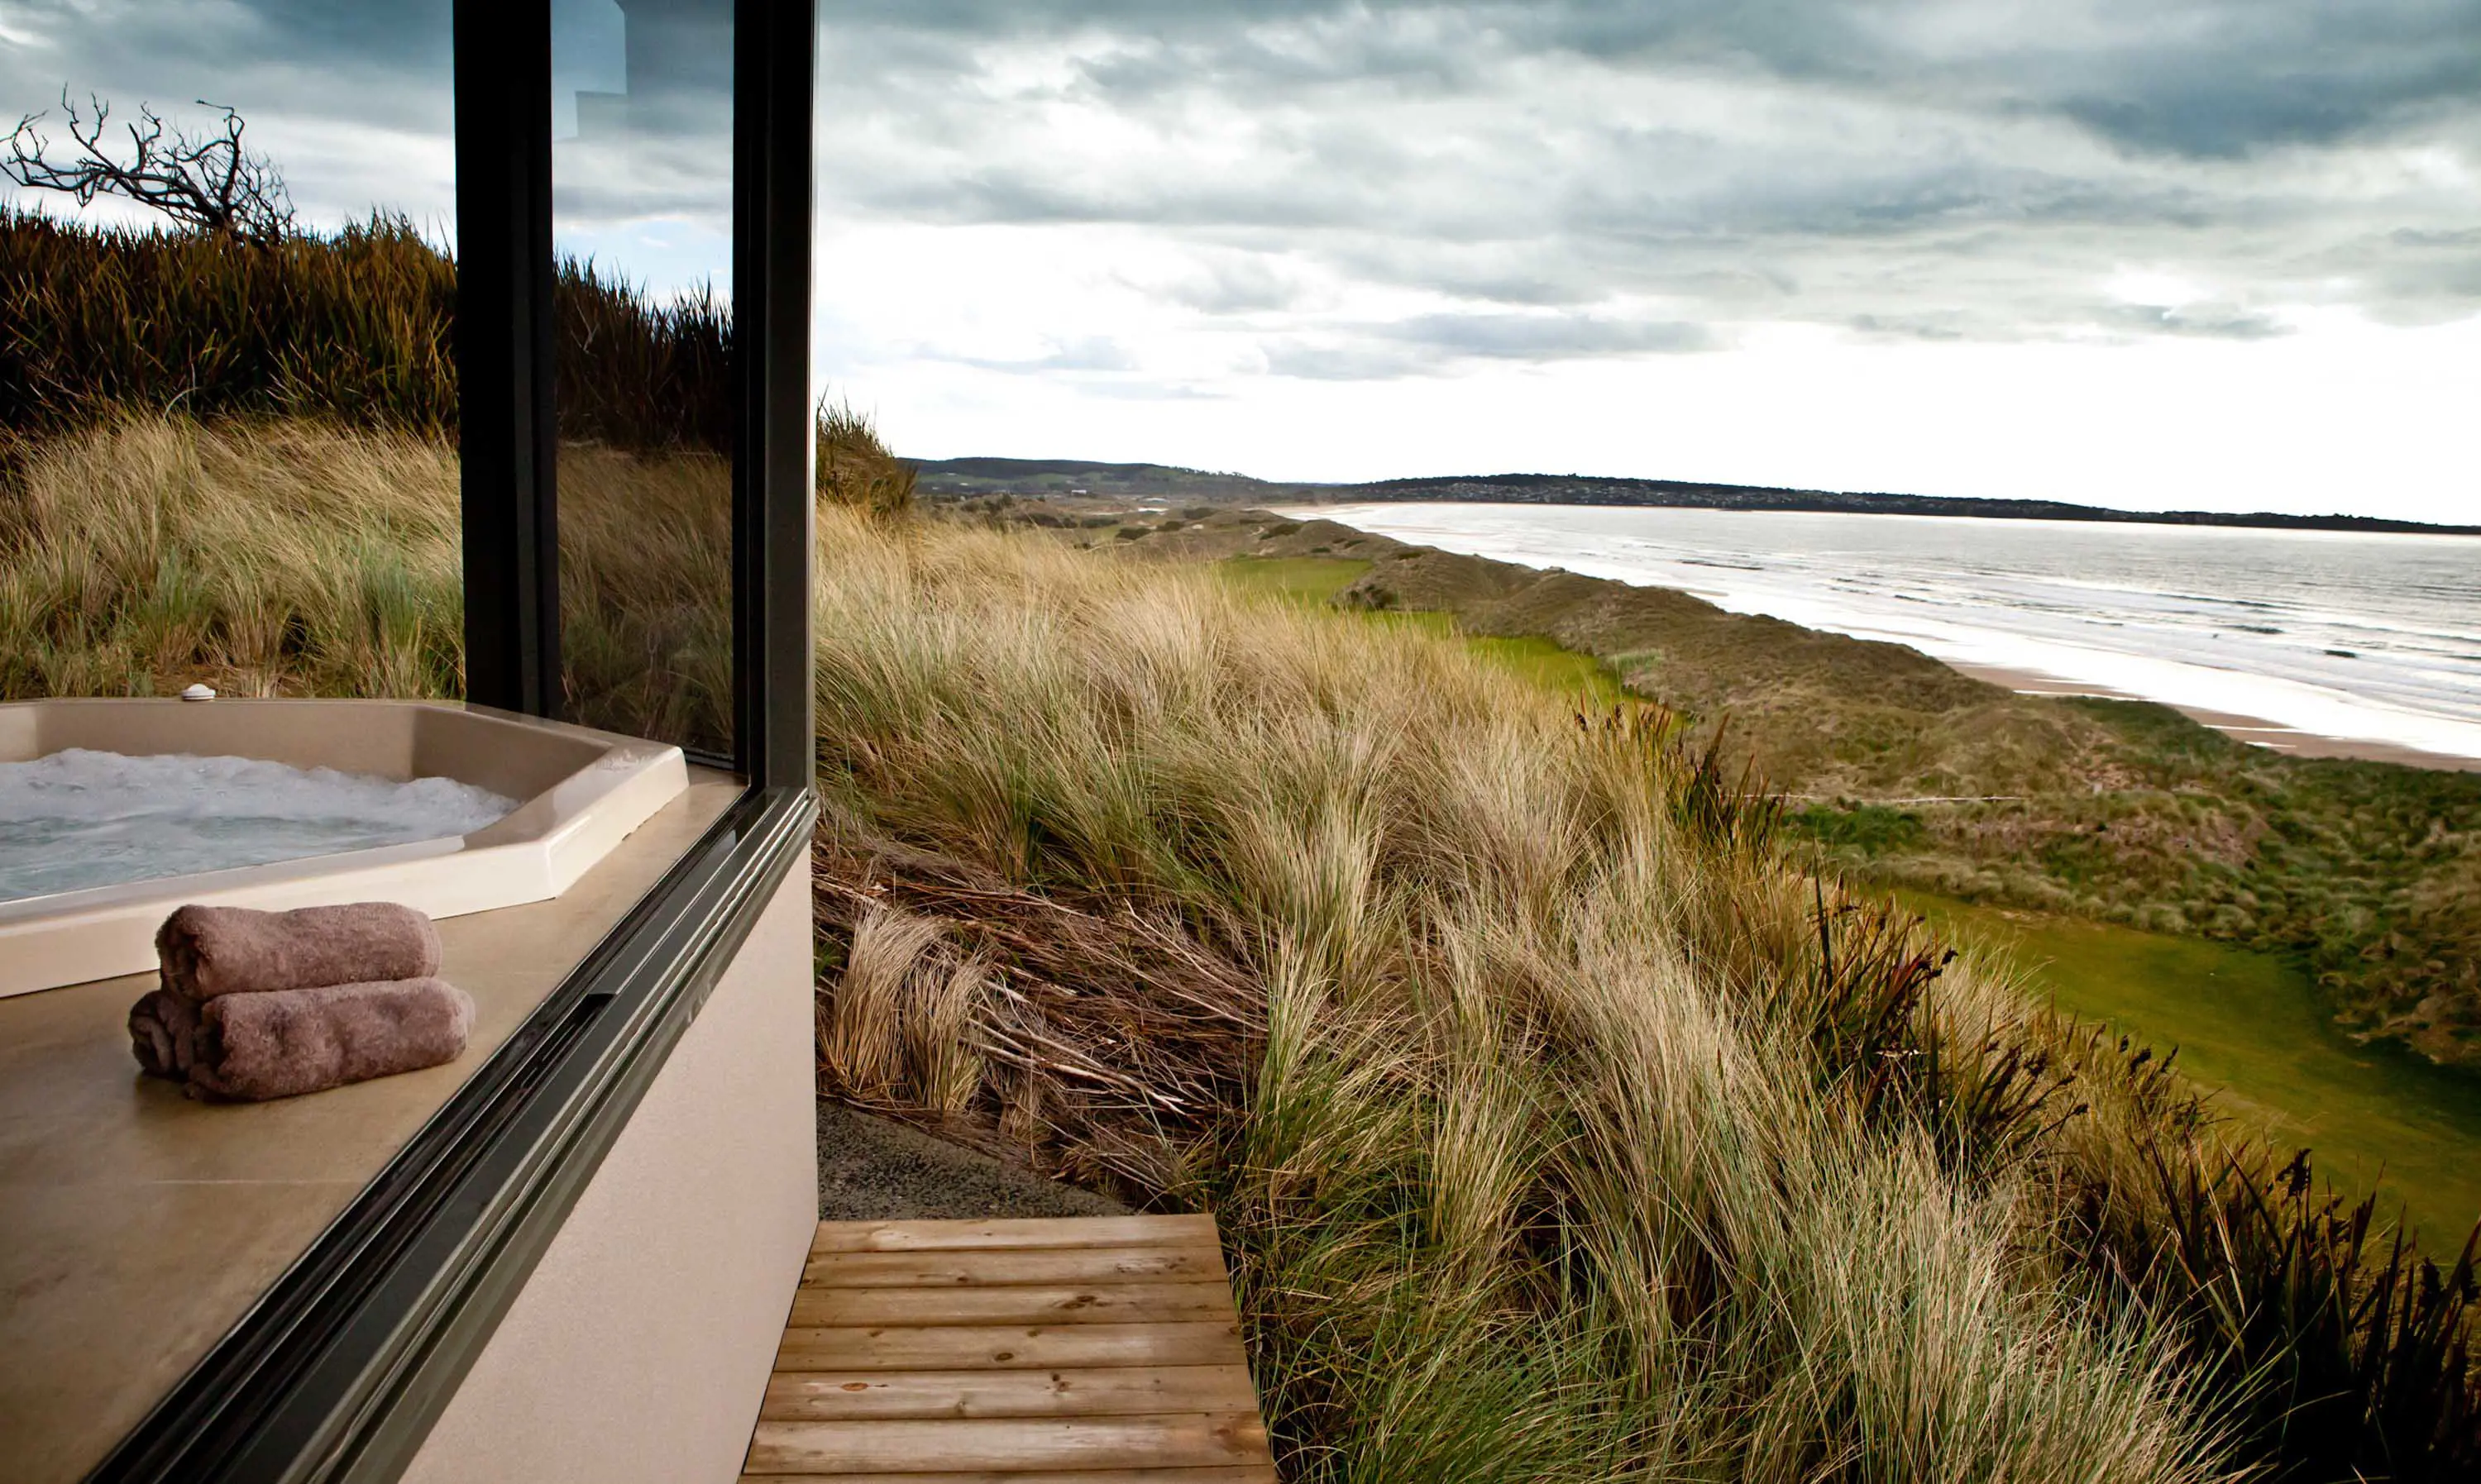 An enclosed spa looks out over a grassy coast with the ocean in the distance.